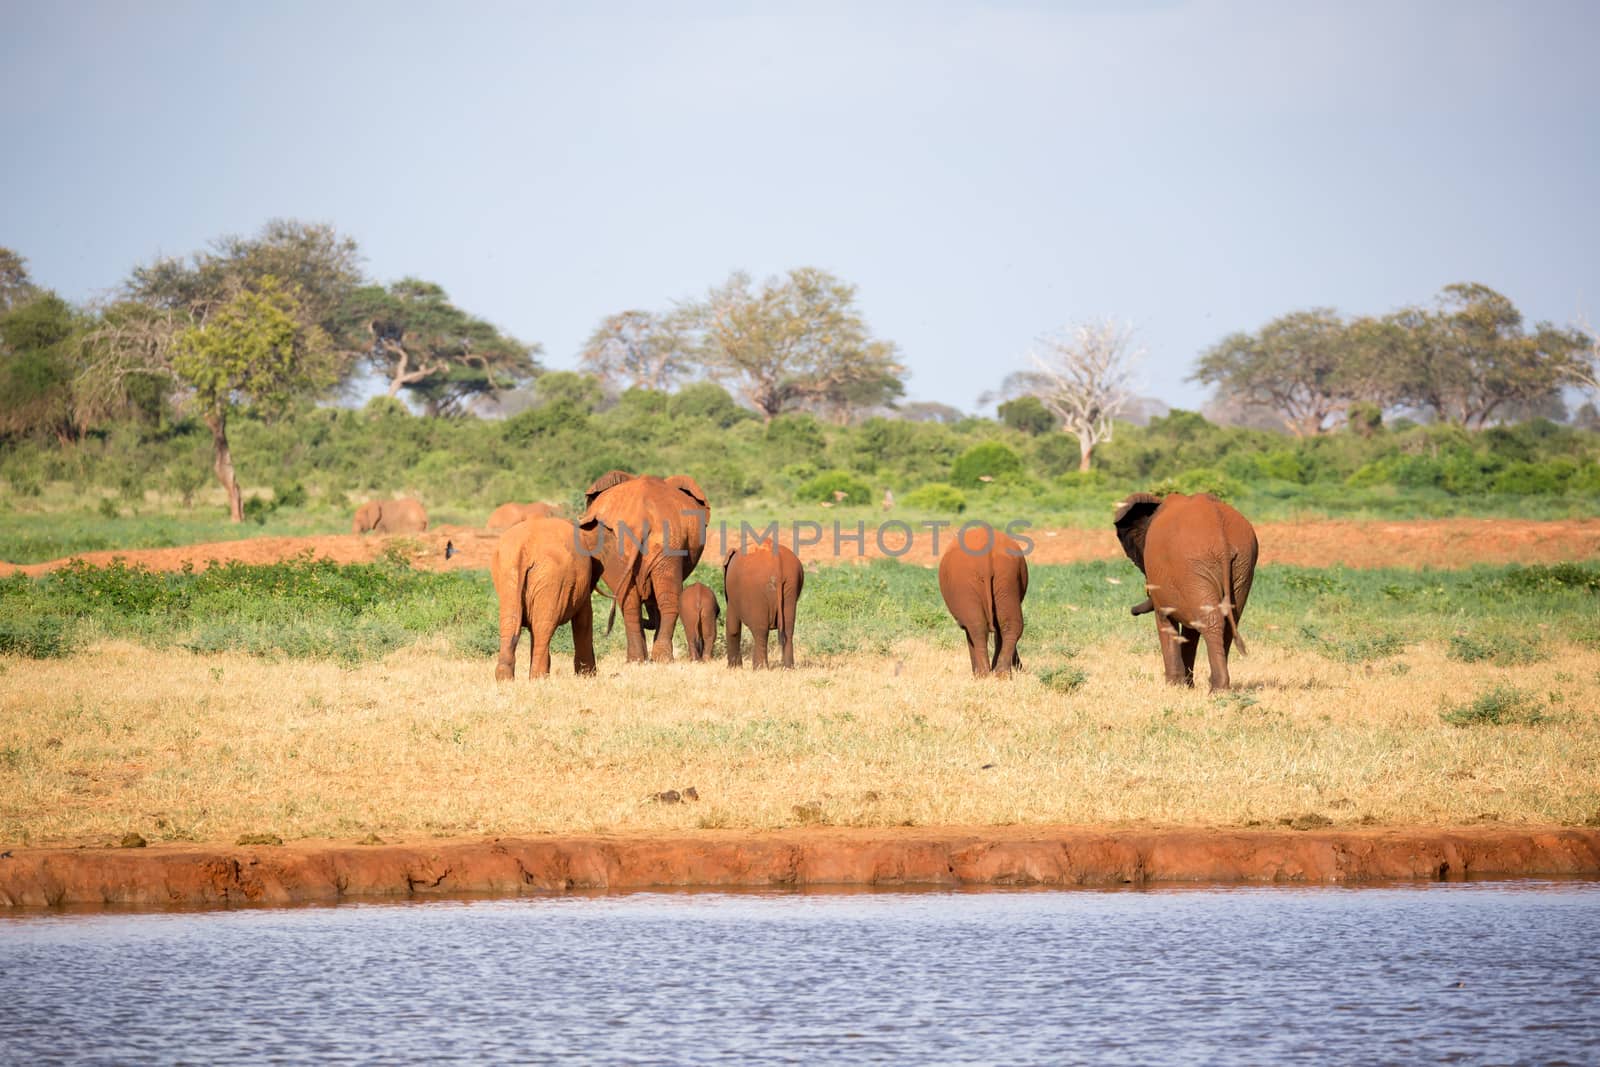 The large family of red elephants on their way through the Kenyan savanna